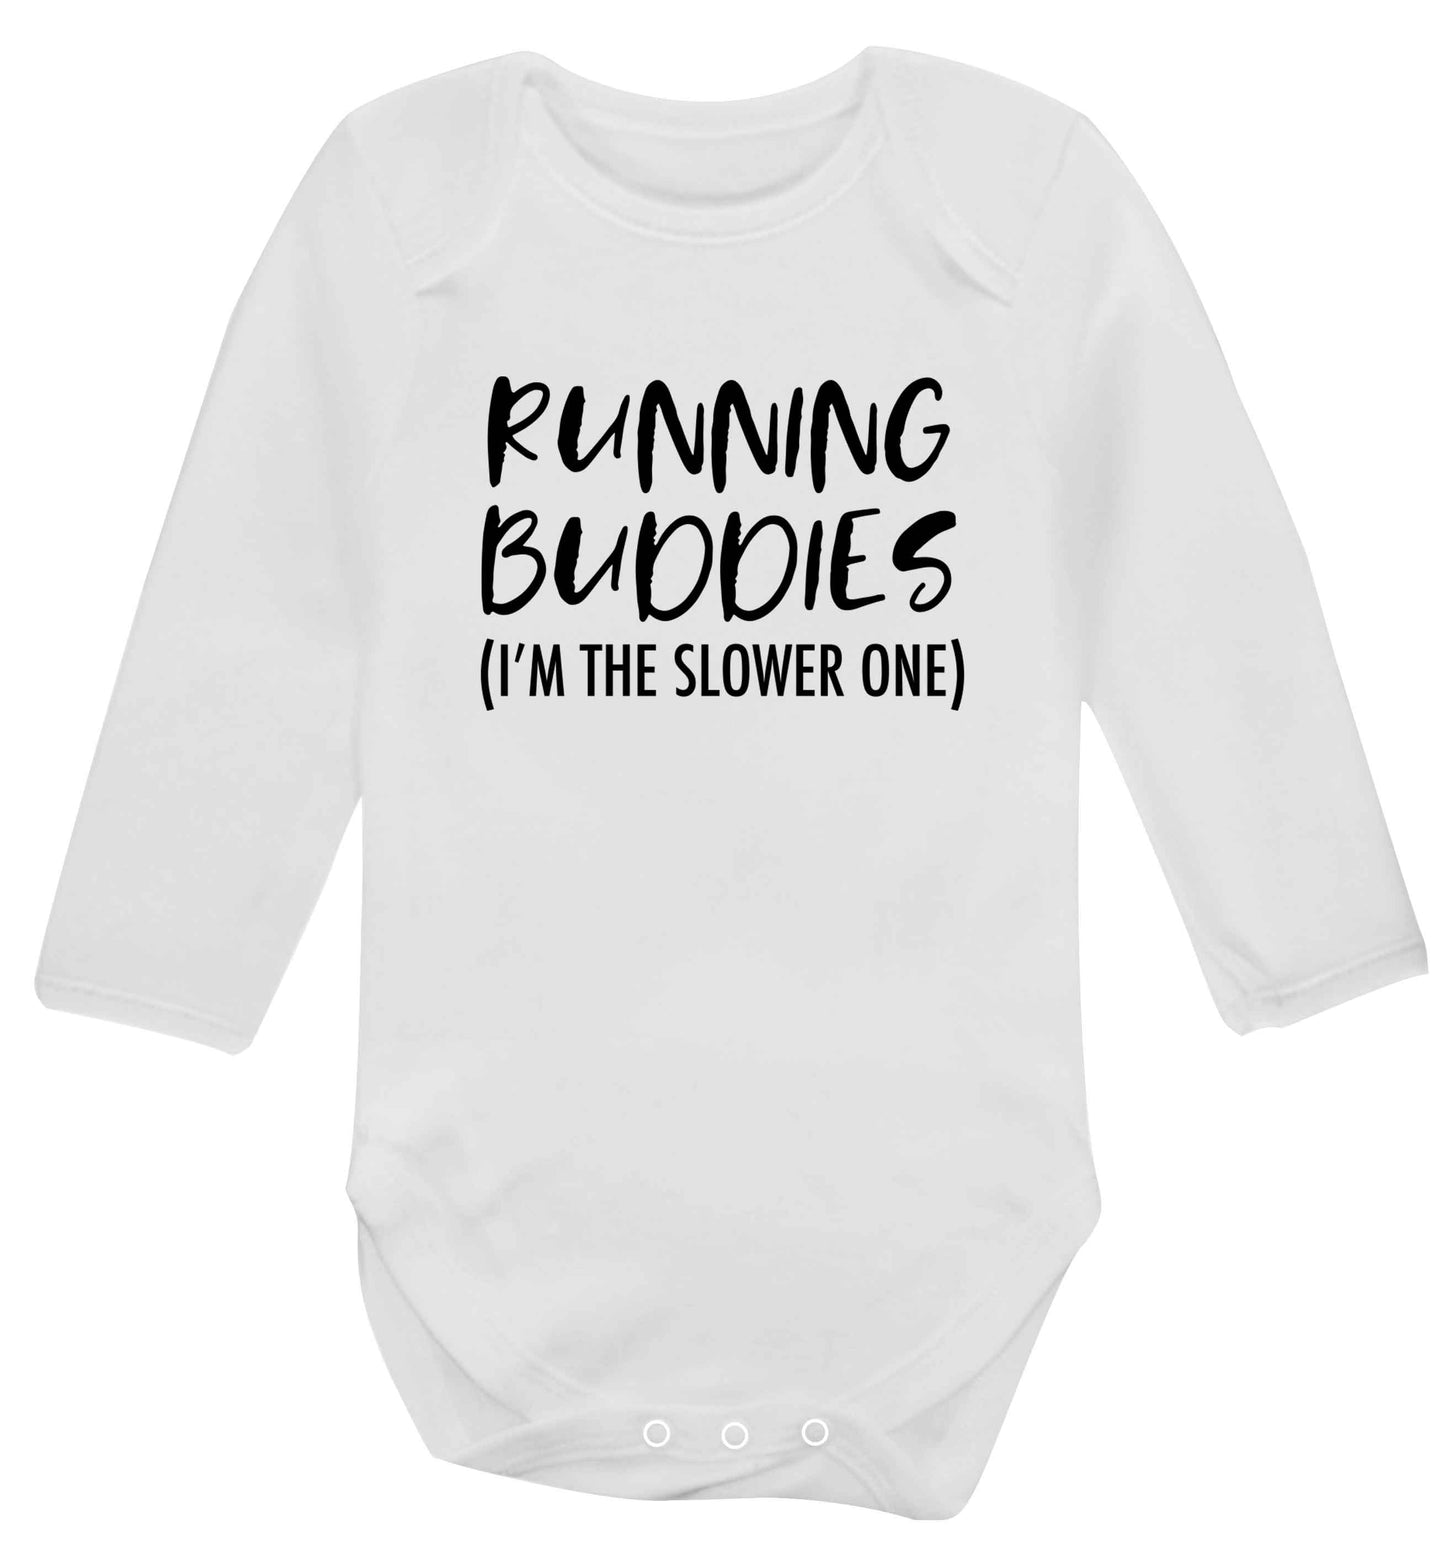 Running buddies (I'm the slower one) baby vest long sleeved white 6-12 months